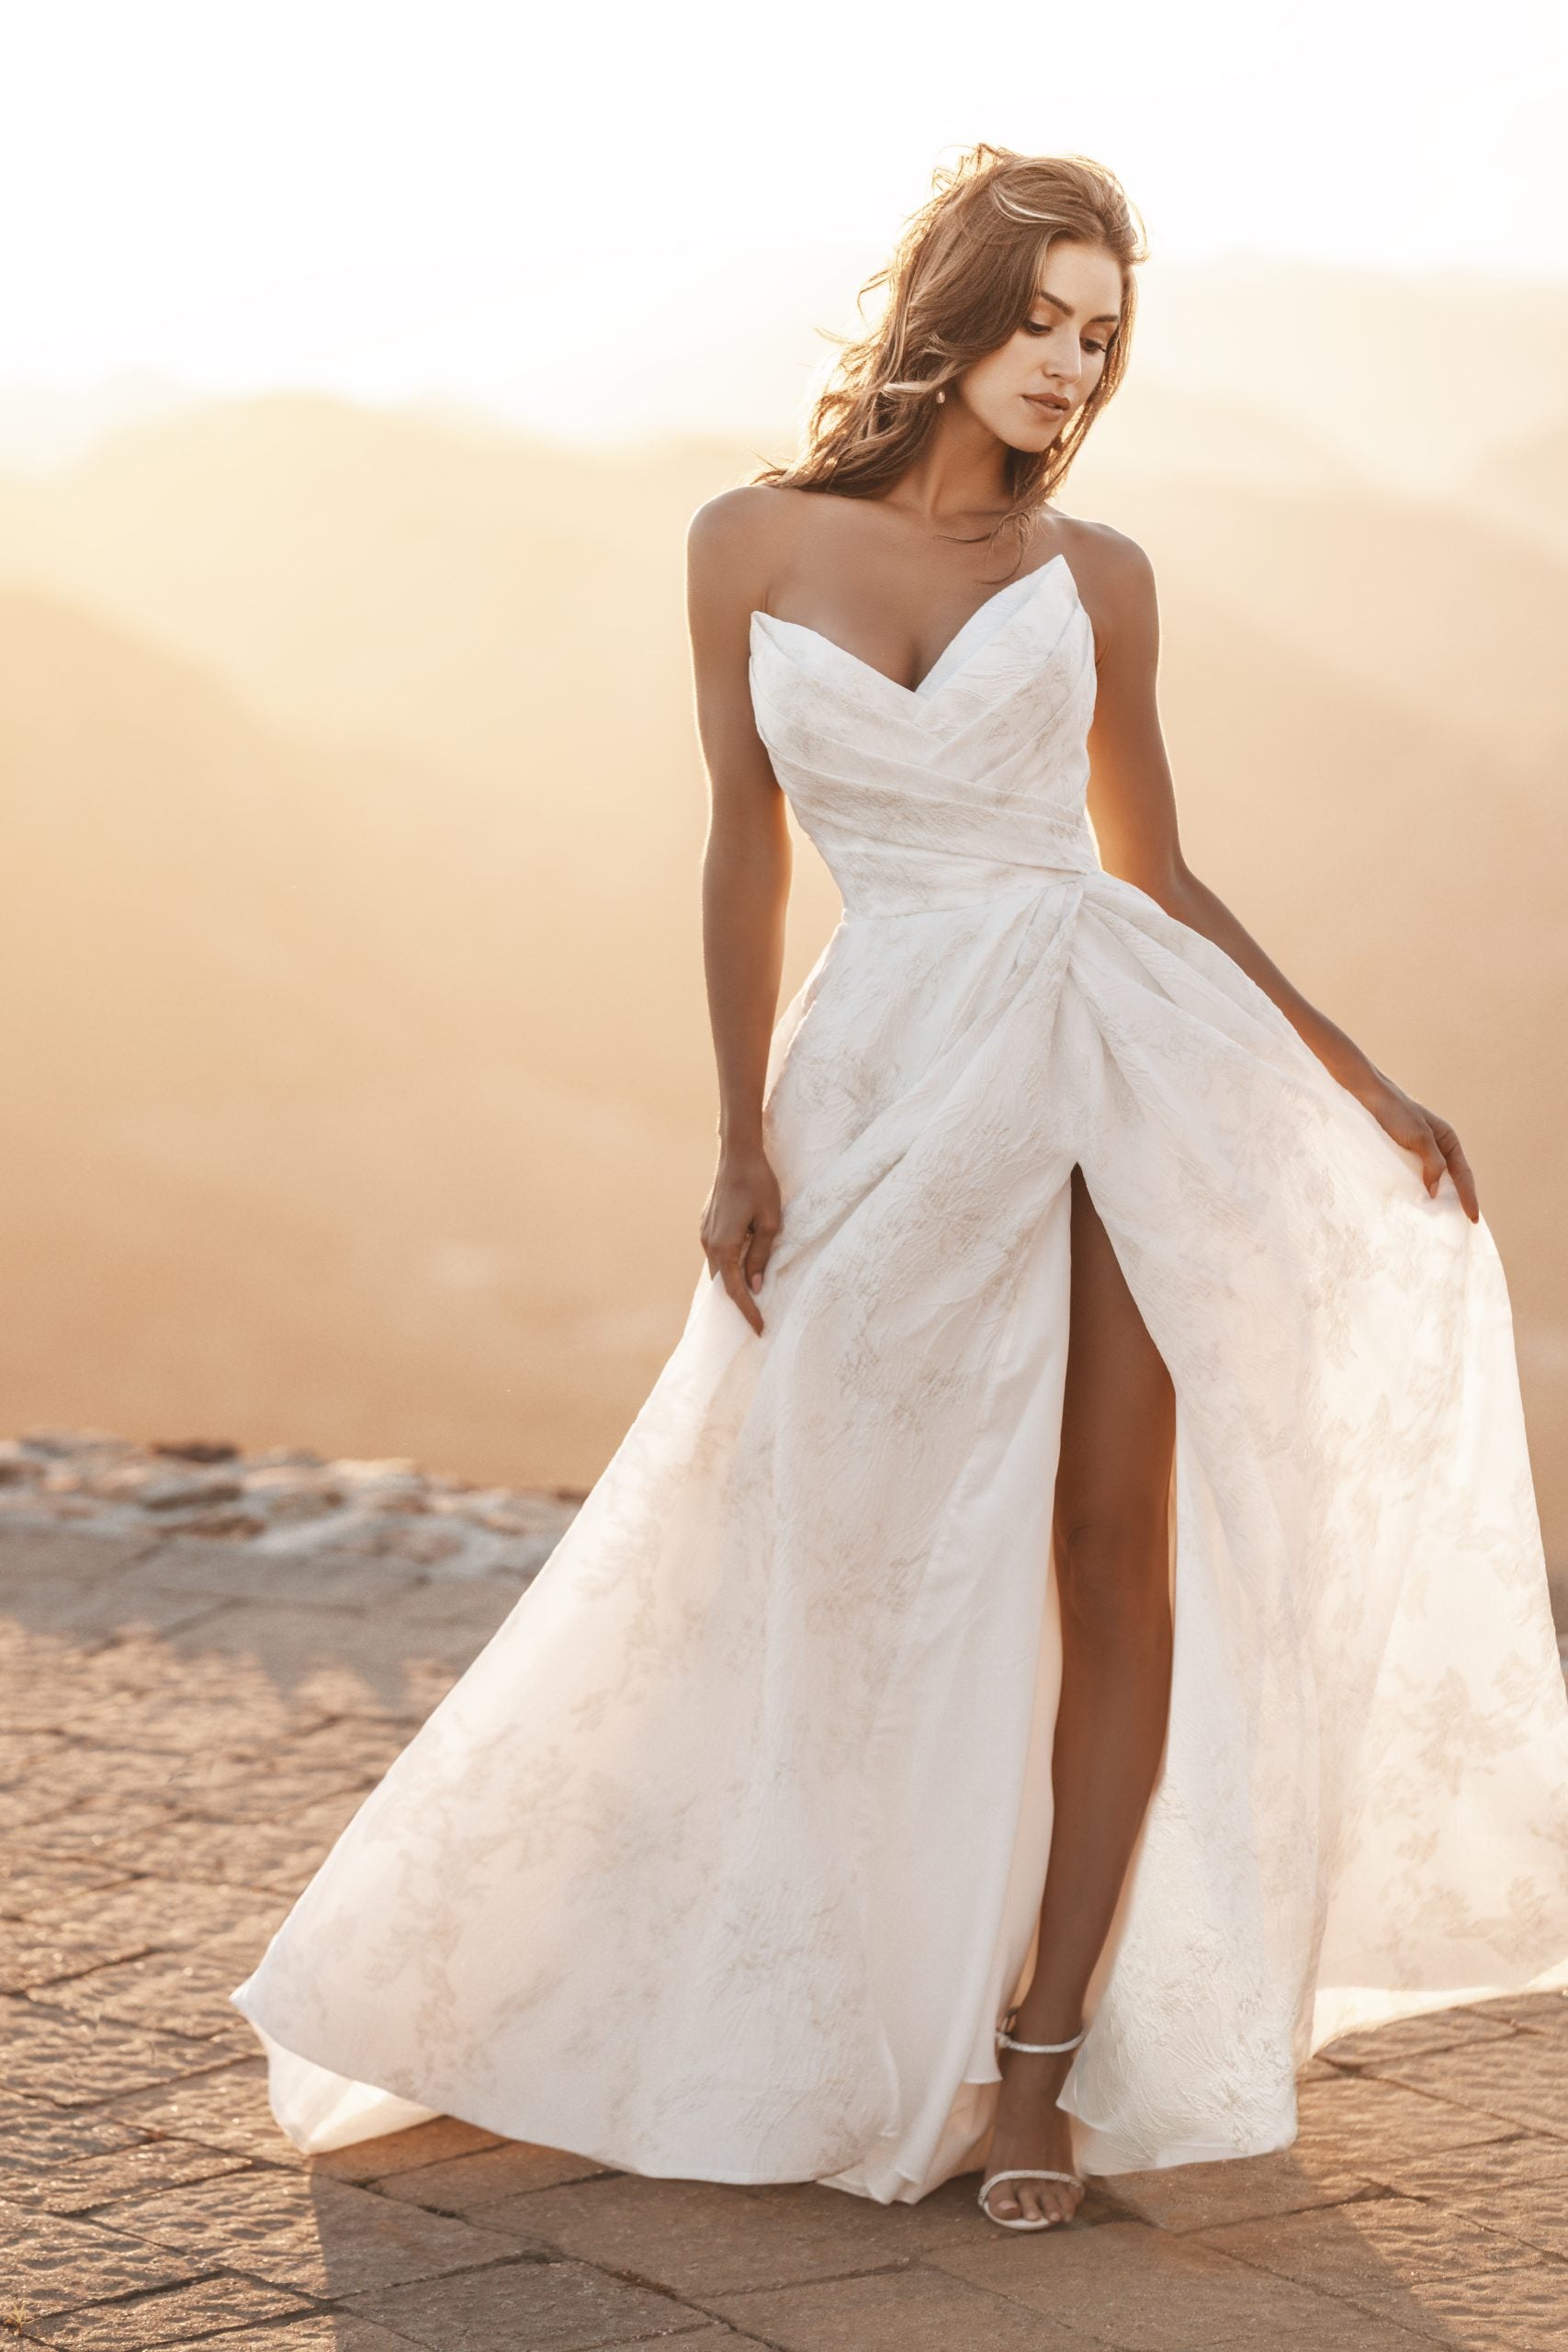 Ruched Strapless A-line Gown With A Pleated Slit by Allure Bridals - Image 1